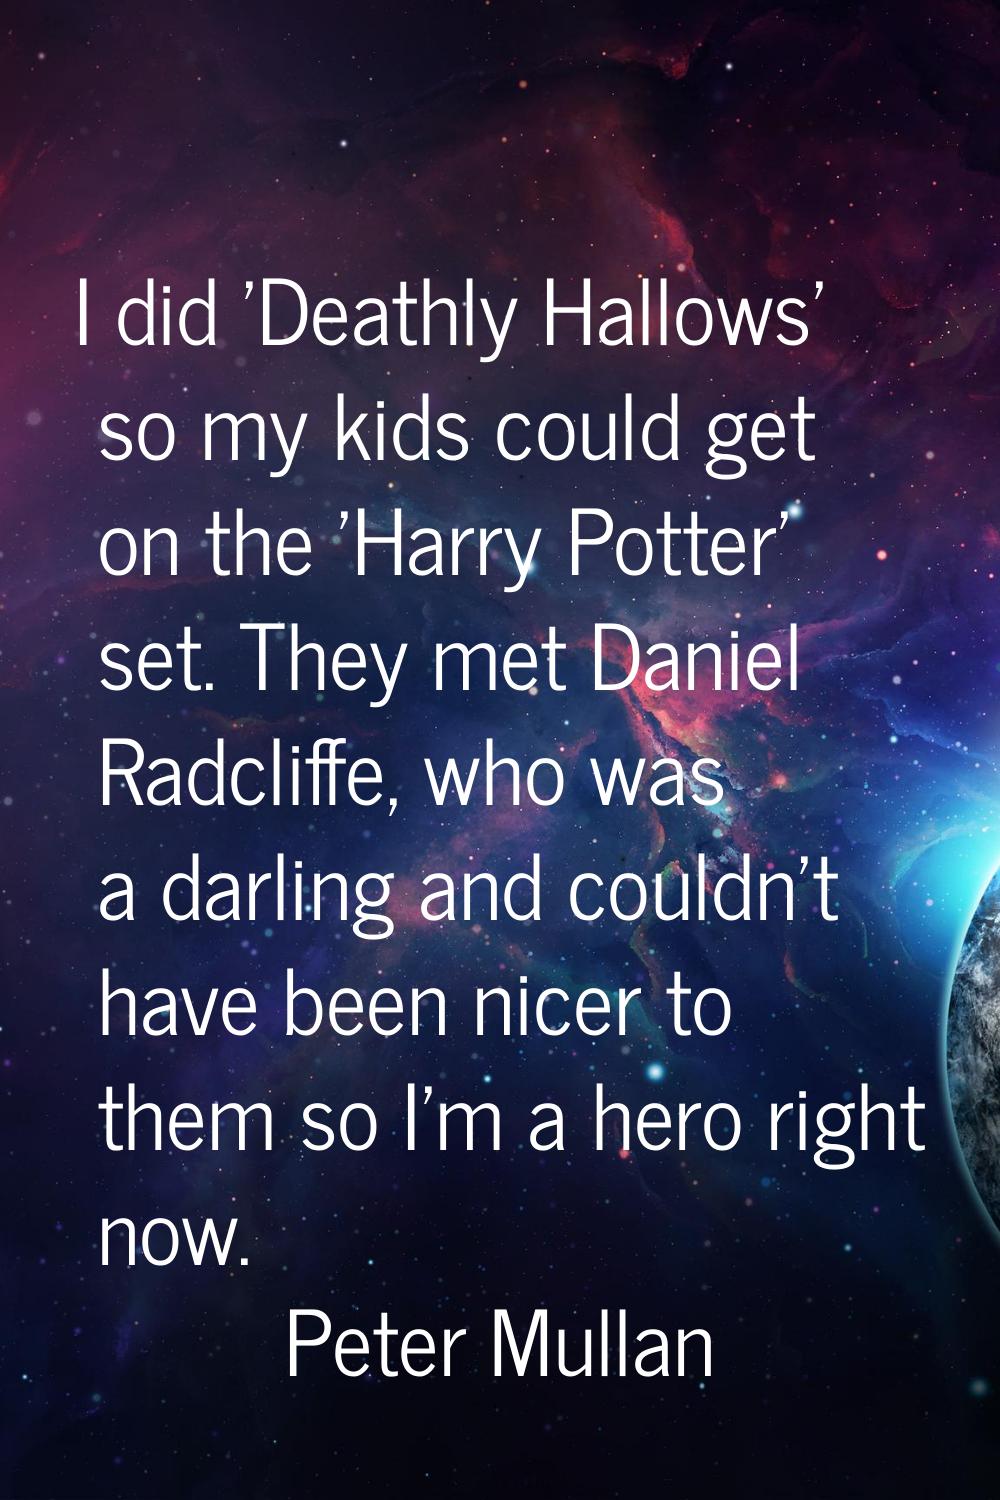 I did 'Deathly Hallows' so my kids could get on the 'Harry Potter' set. They met Daniel Radcliffe, 